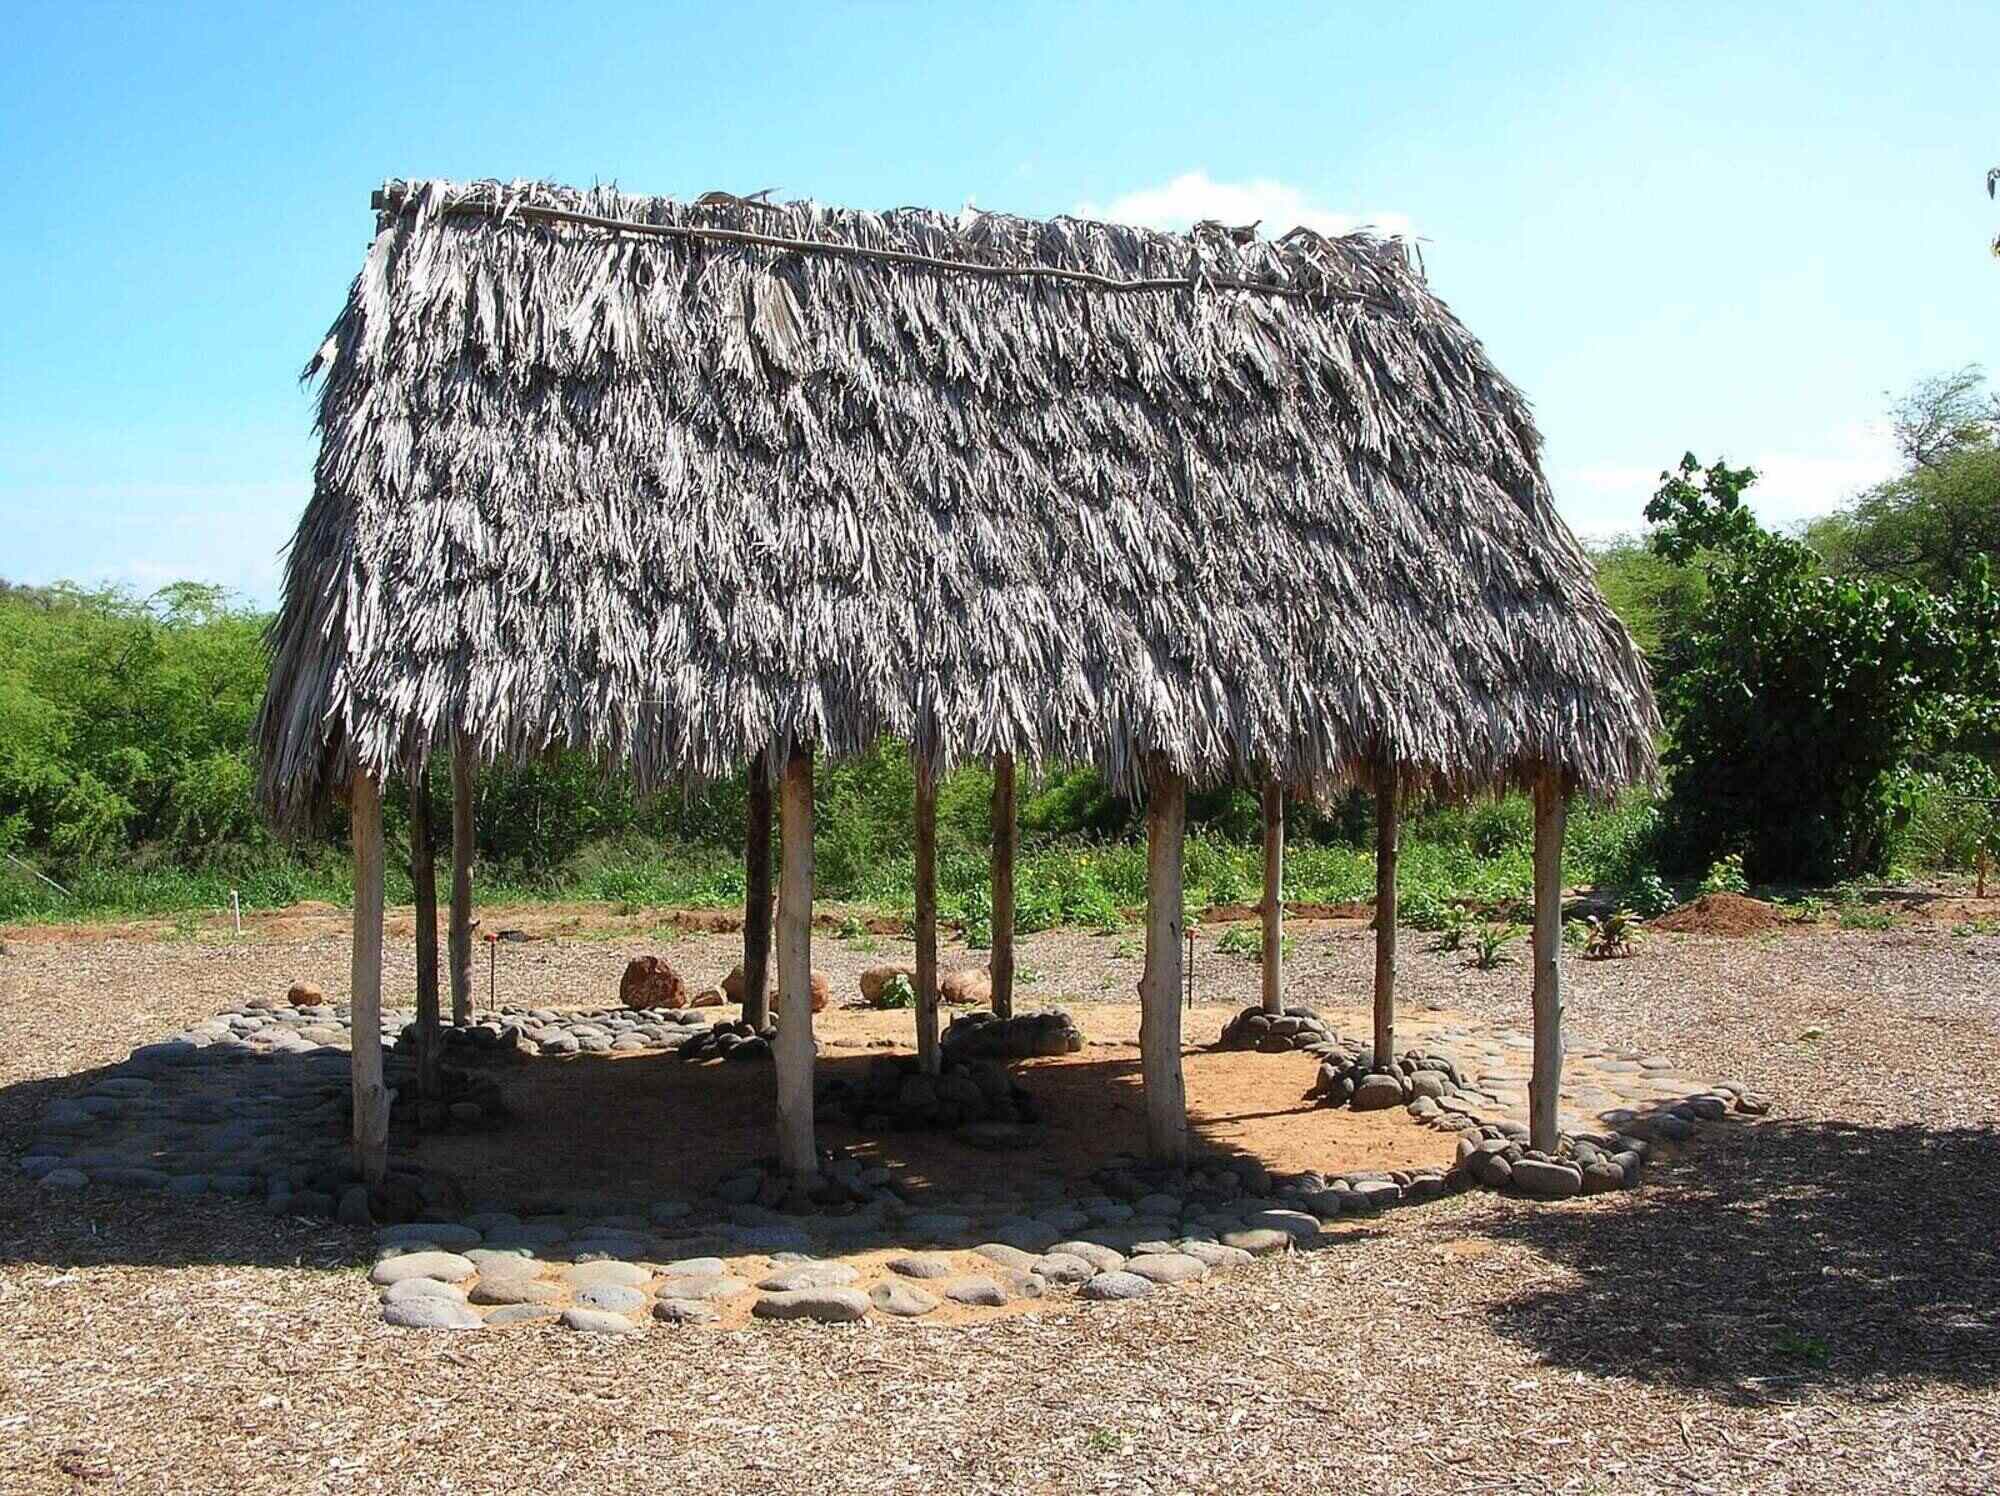 Photograph of an open-sided shelter at Maui Nui Botanical Garden, Maui, Hawaiian islands, with thatched roof made of tanglehead. The photo shows a pavilion supported by rough-hewn wood poles with a peaked roof thatched with dried grass.